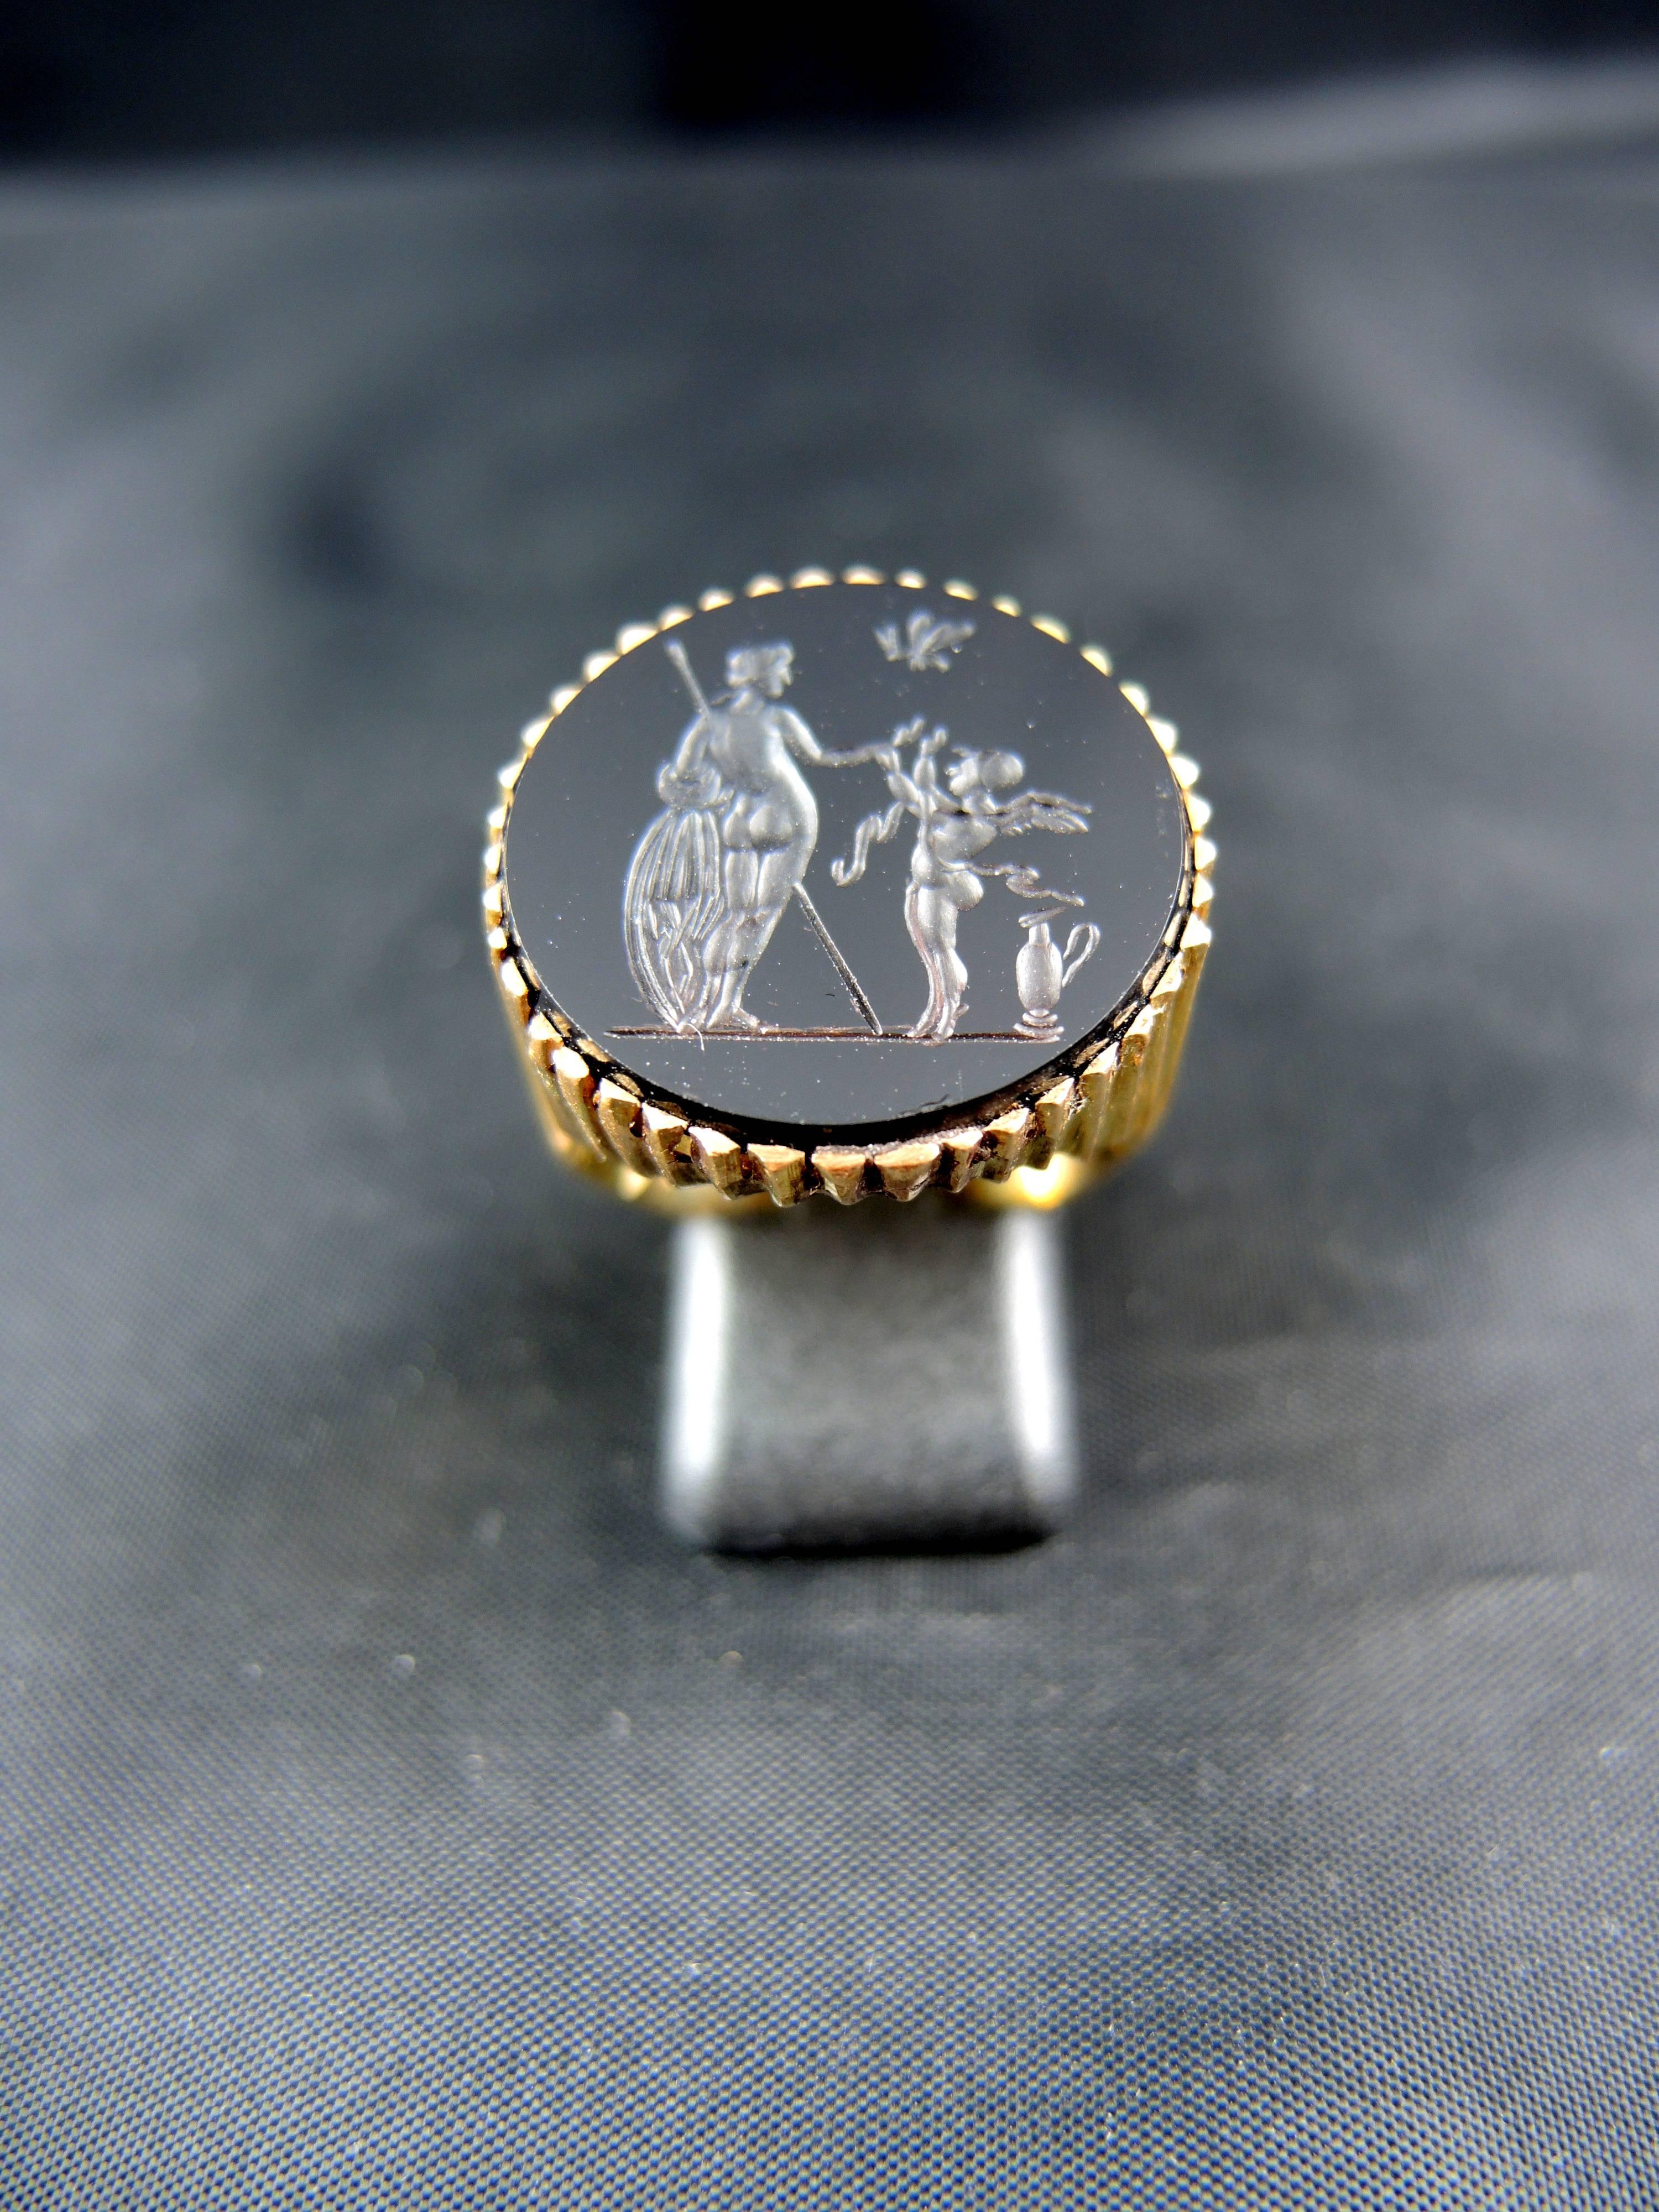 18kt yellow gold ring (quality mark: weevil) with an onyx intaglio engraved.
Circa 1970.

Weight: 12,80g
Ring size: 61 (diameter 19,40 / US size 9,50)